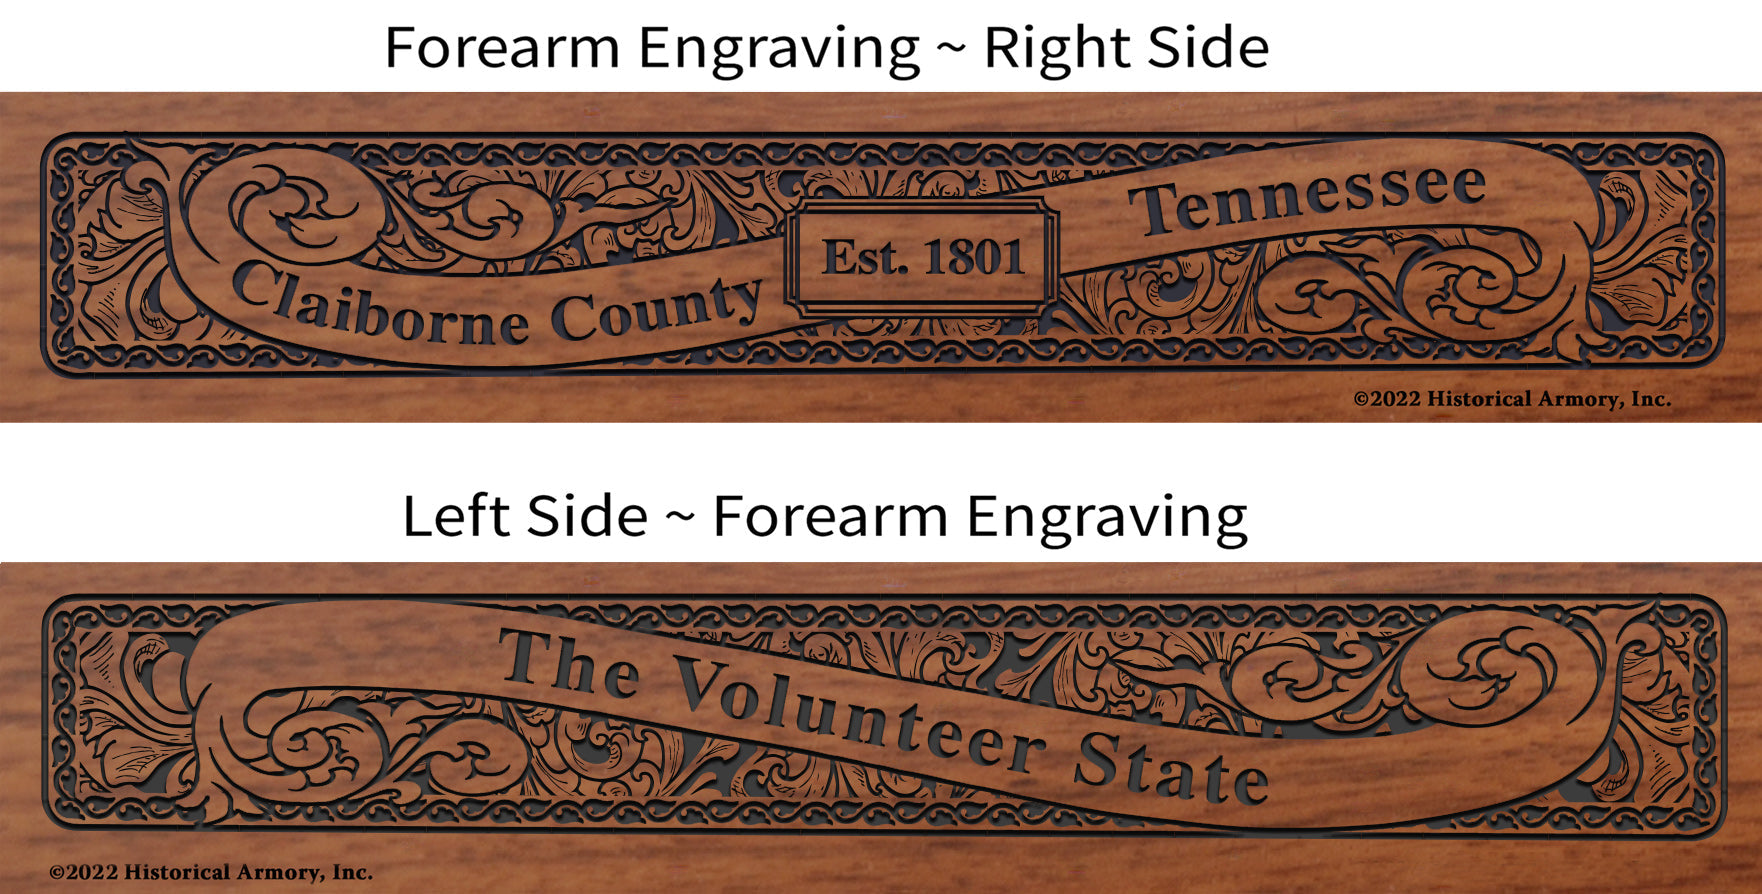 Claiborne County Tennessee Engraved Rifle Forearm